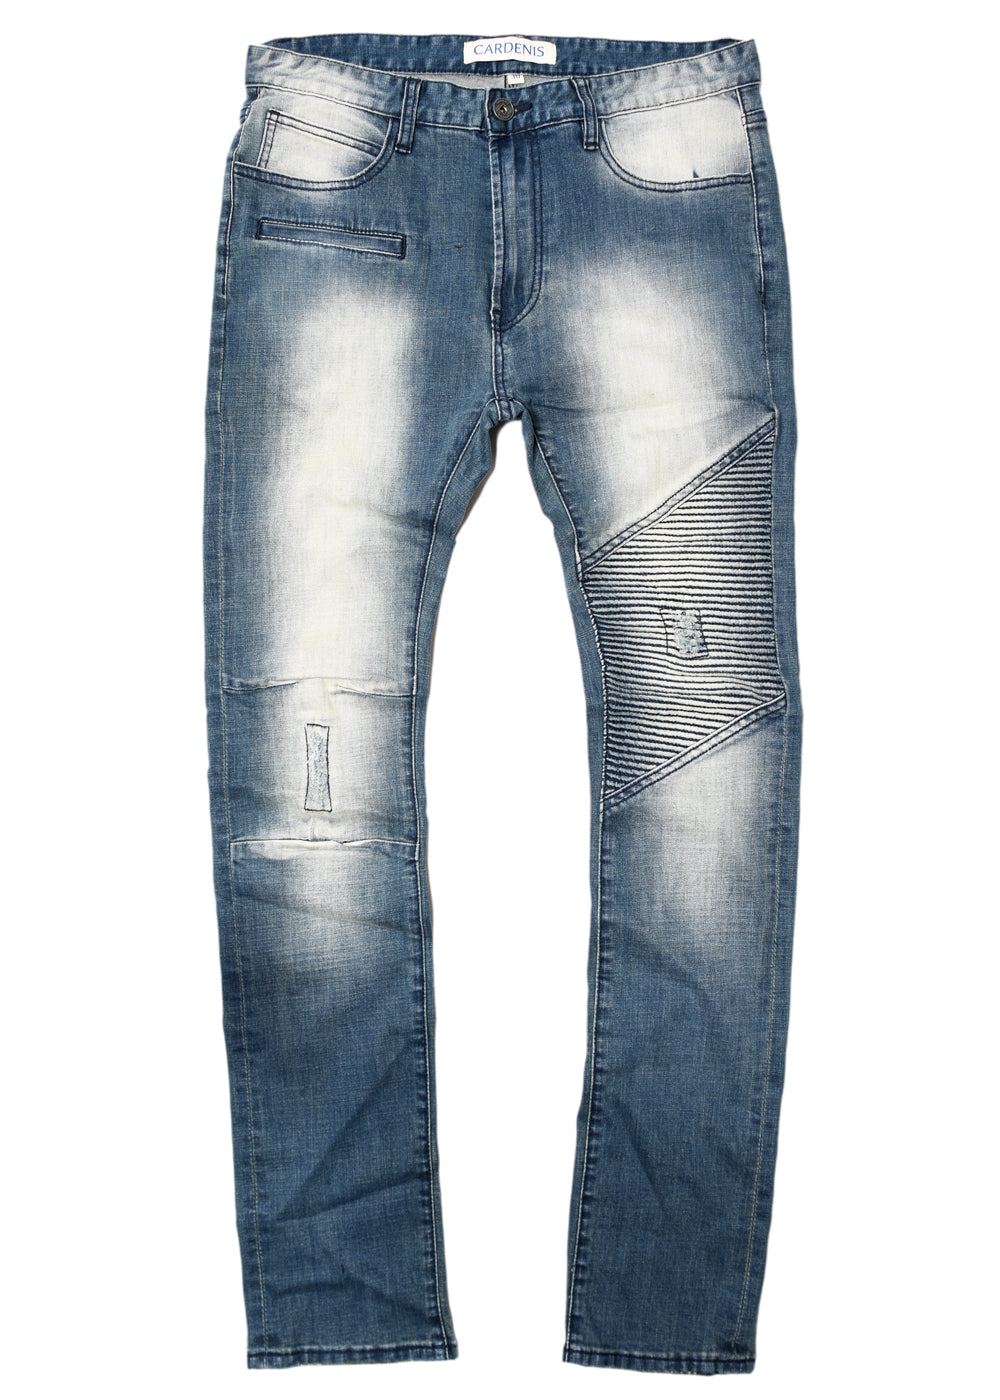 Material Good Tainted Wash Jeans By Cardenis – Cardenis Denim